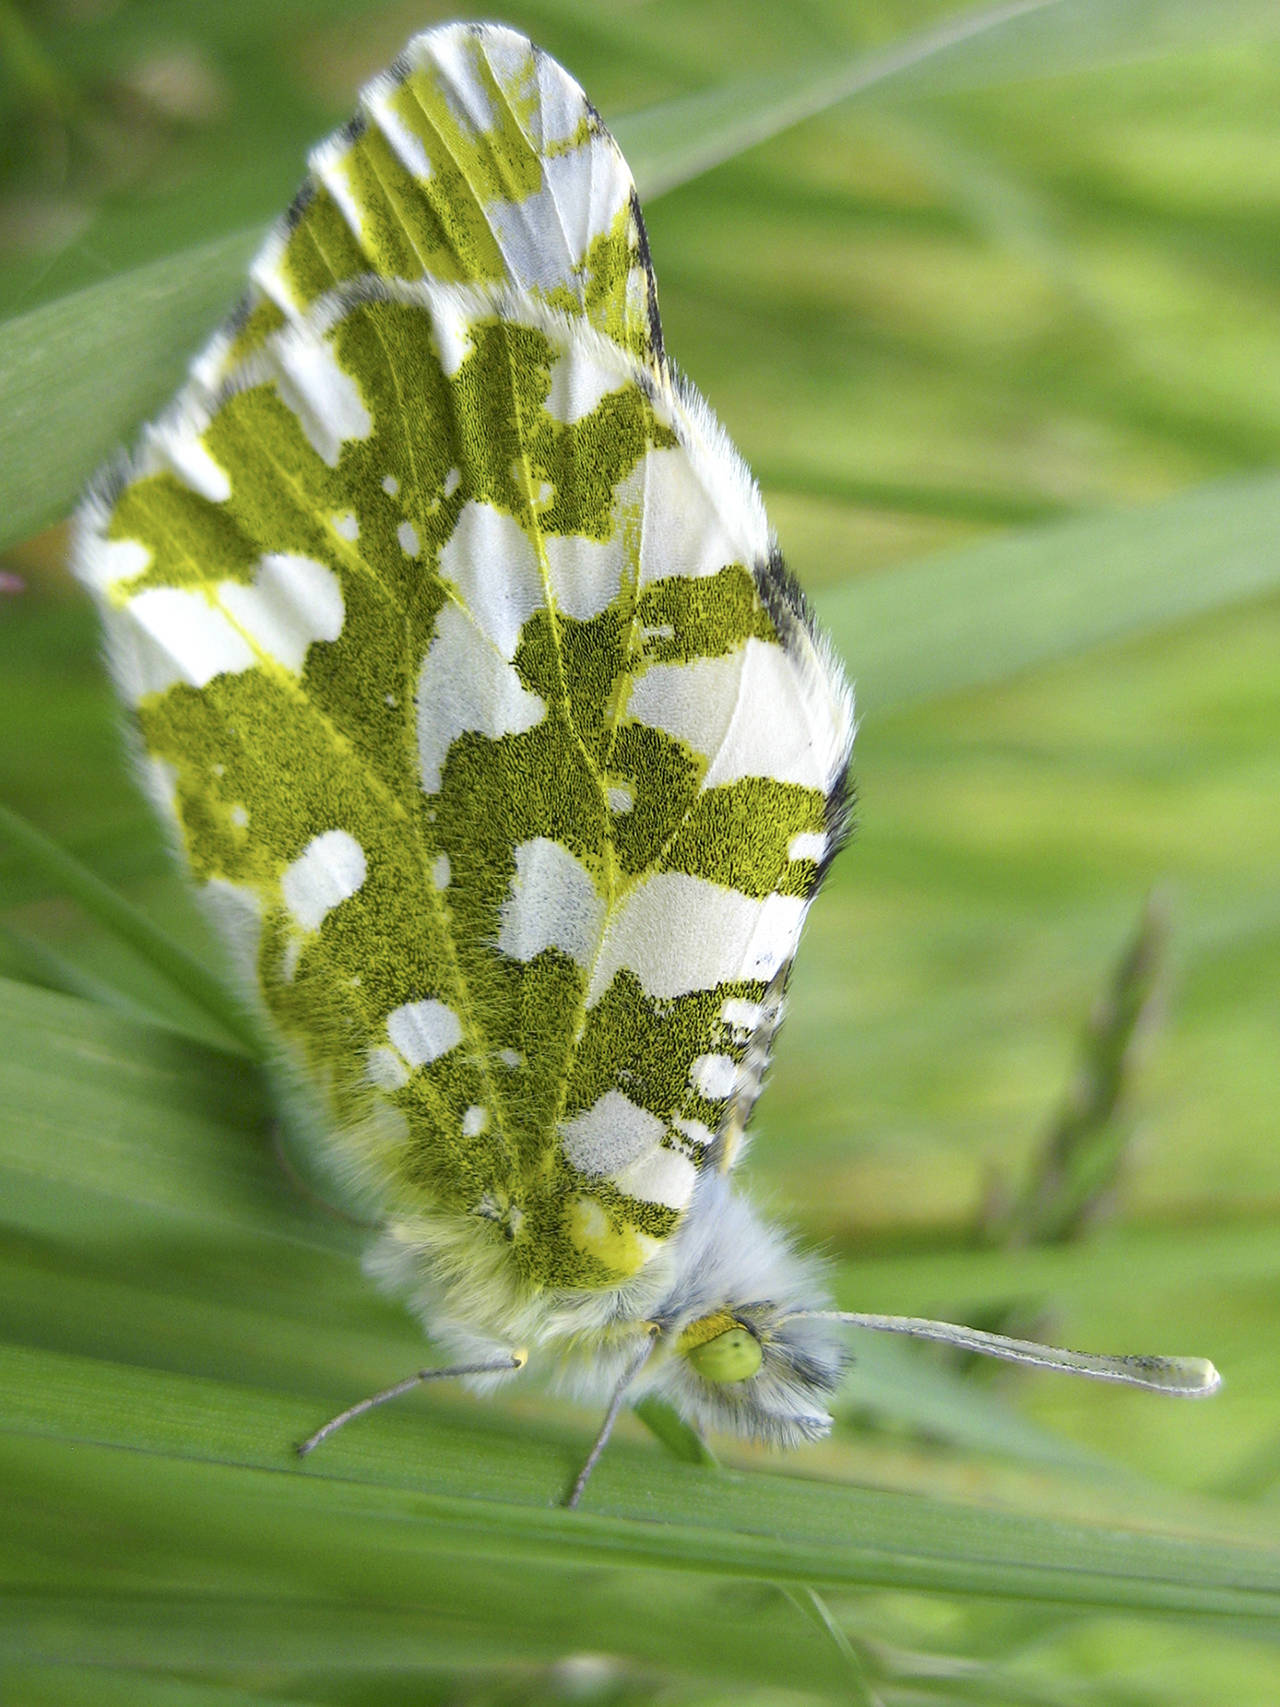 Federal wildlife officials want to protect the rare white and green island marble butterfly, found only on Washington’s San Juan Island. (Karen Reagan/US Fish and Wildlife Service via AP)